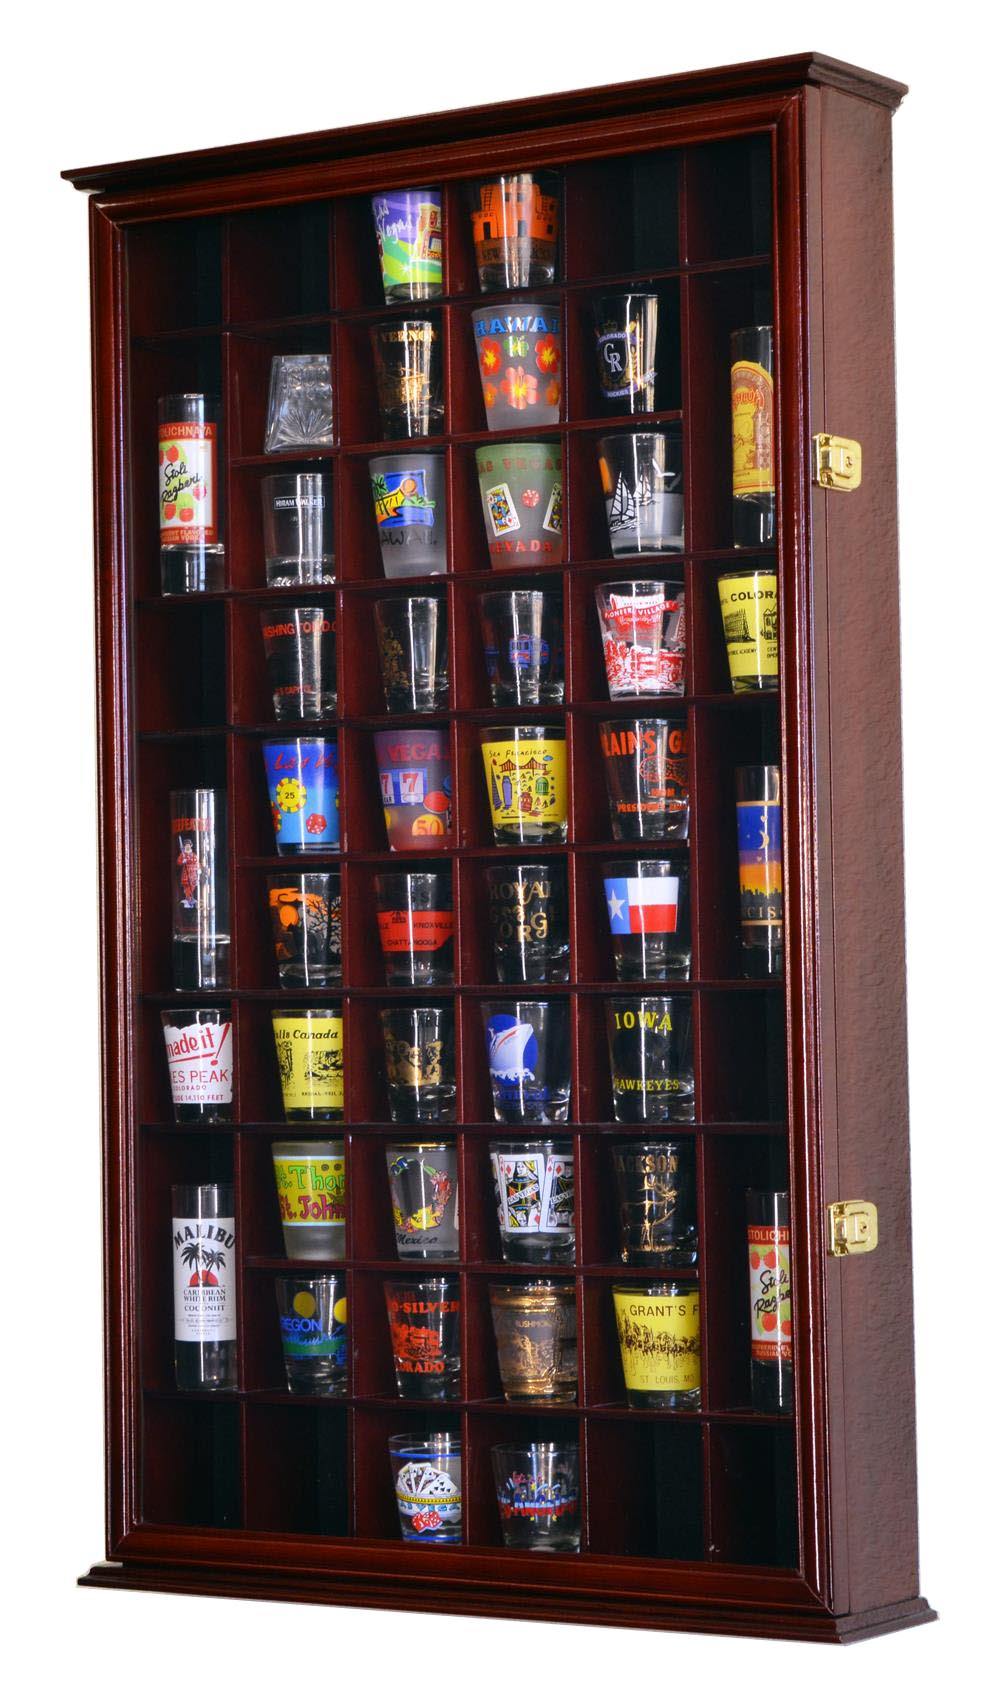 Fishing Lure Display Case Cabinet